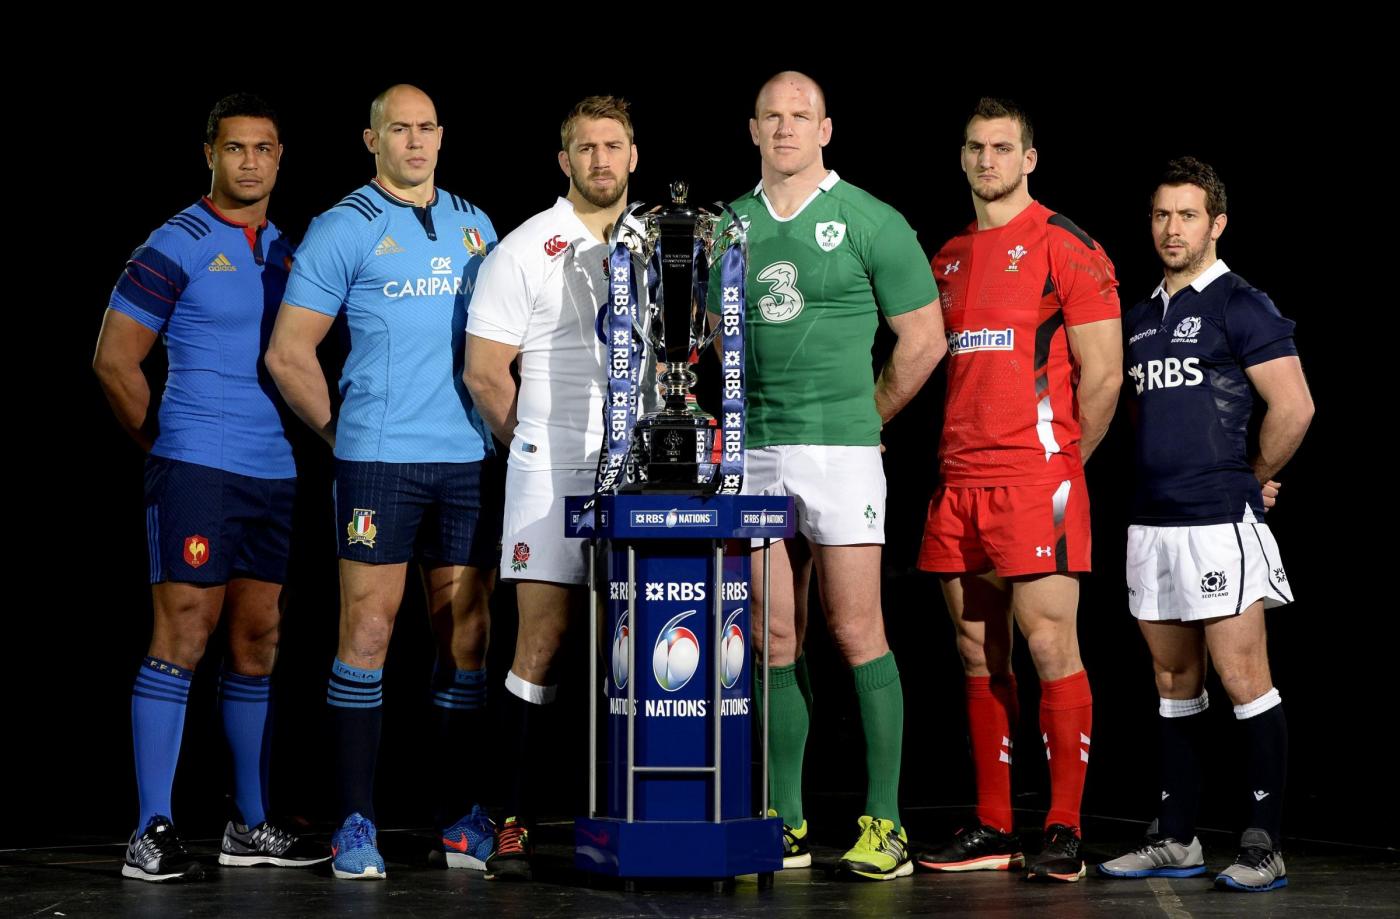 Ireland captain Paul O'Connell (third right), France captain Thierry Dusautoir (left), England captain Chris Robshaw (third left), Italy captain Sergio Parisse (second left), Wales captain Sam Warburton (second right) and Scotland captain Greig Laidlaw (right) pose with the new 6 Nations trophy during the RBS Six Nations Launch at the Hurlingham Club, London. PRESS ASSOCIATION Photo. Picture date: Wednesday January 28, 2015. See PA story RUGBYU Six Nations. Photo credit should read: Andrew Matthews/PA Wire